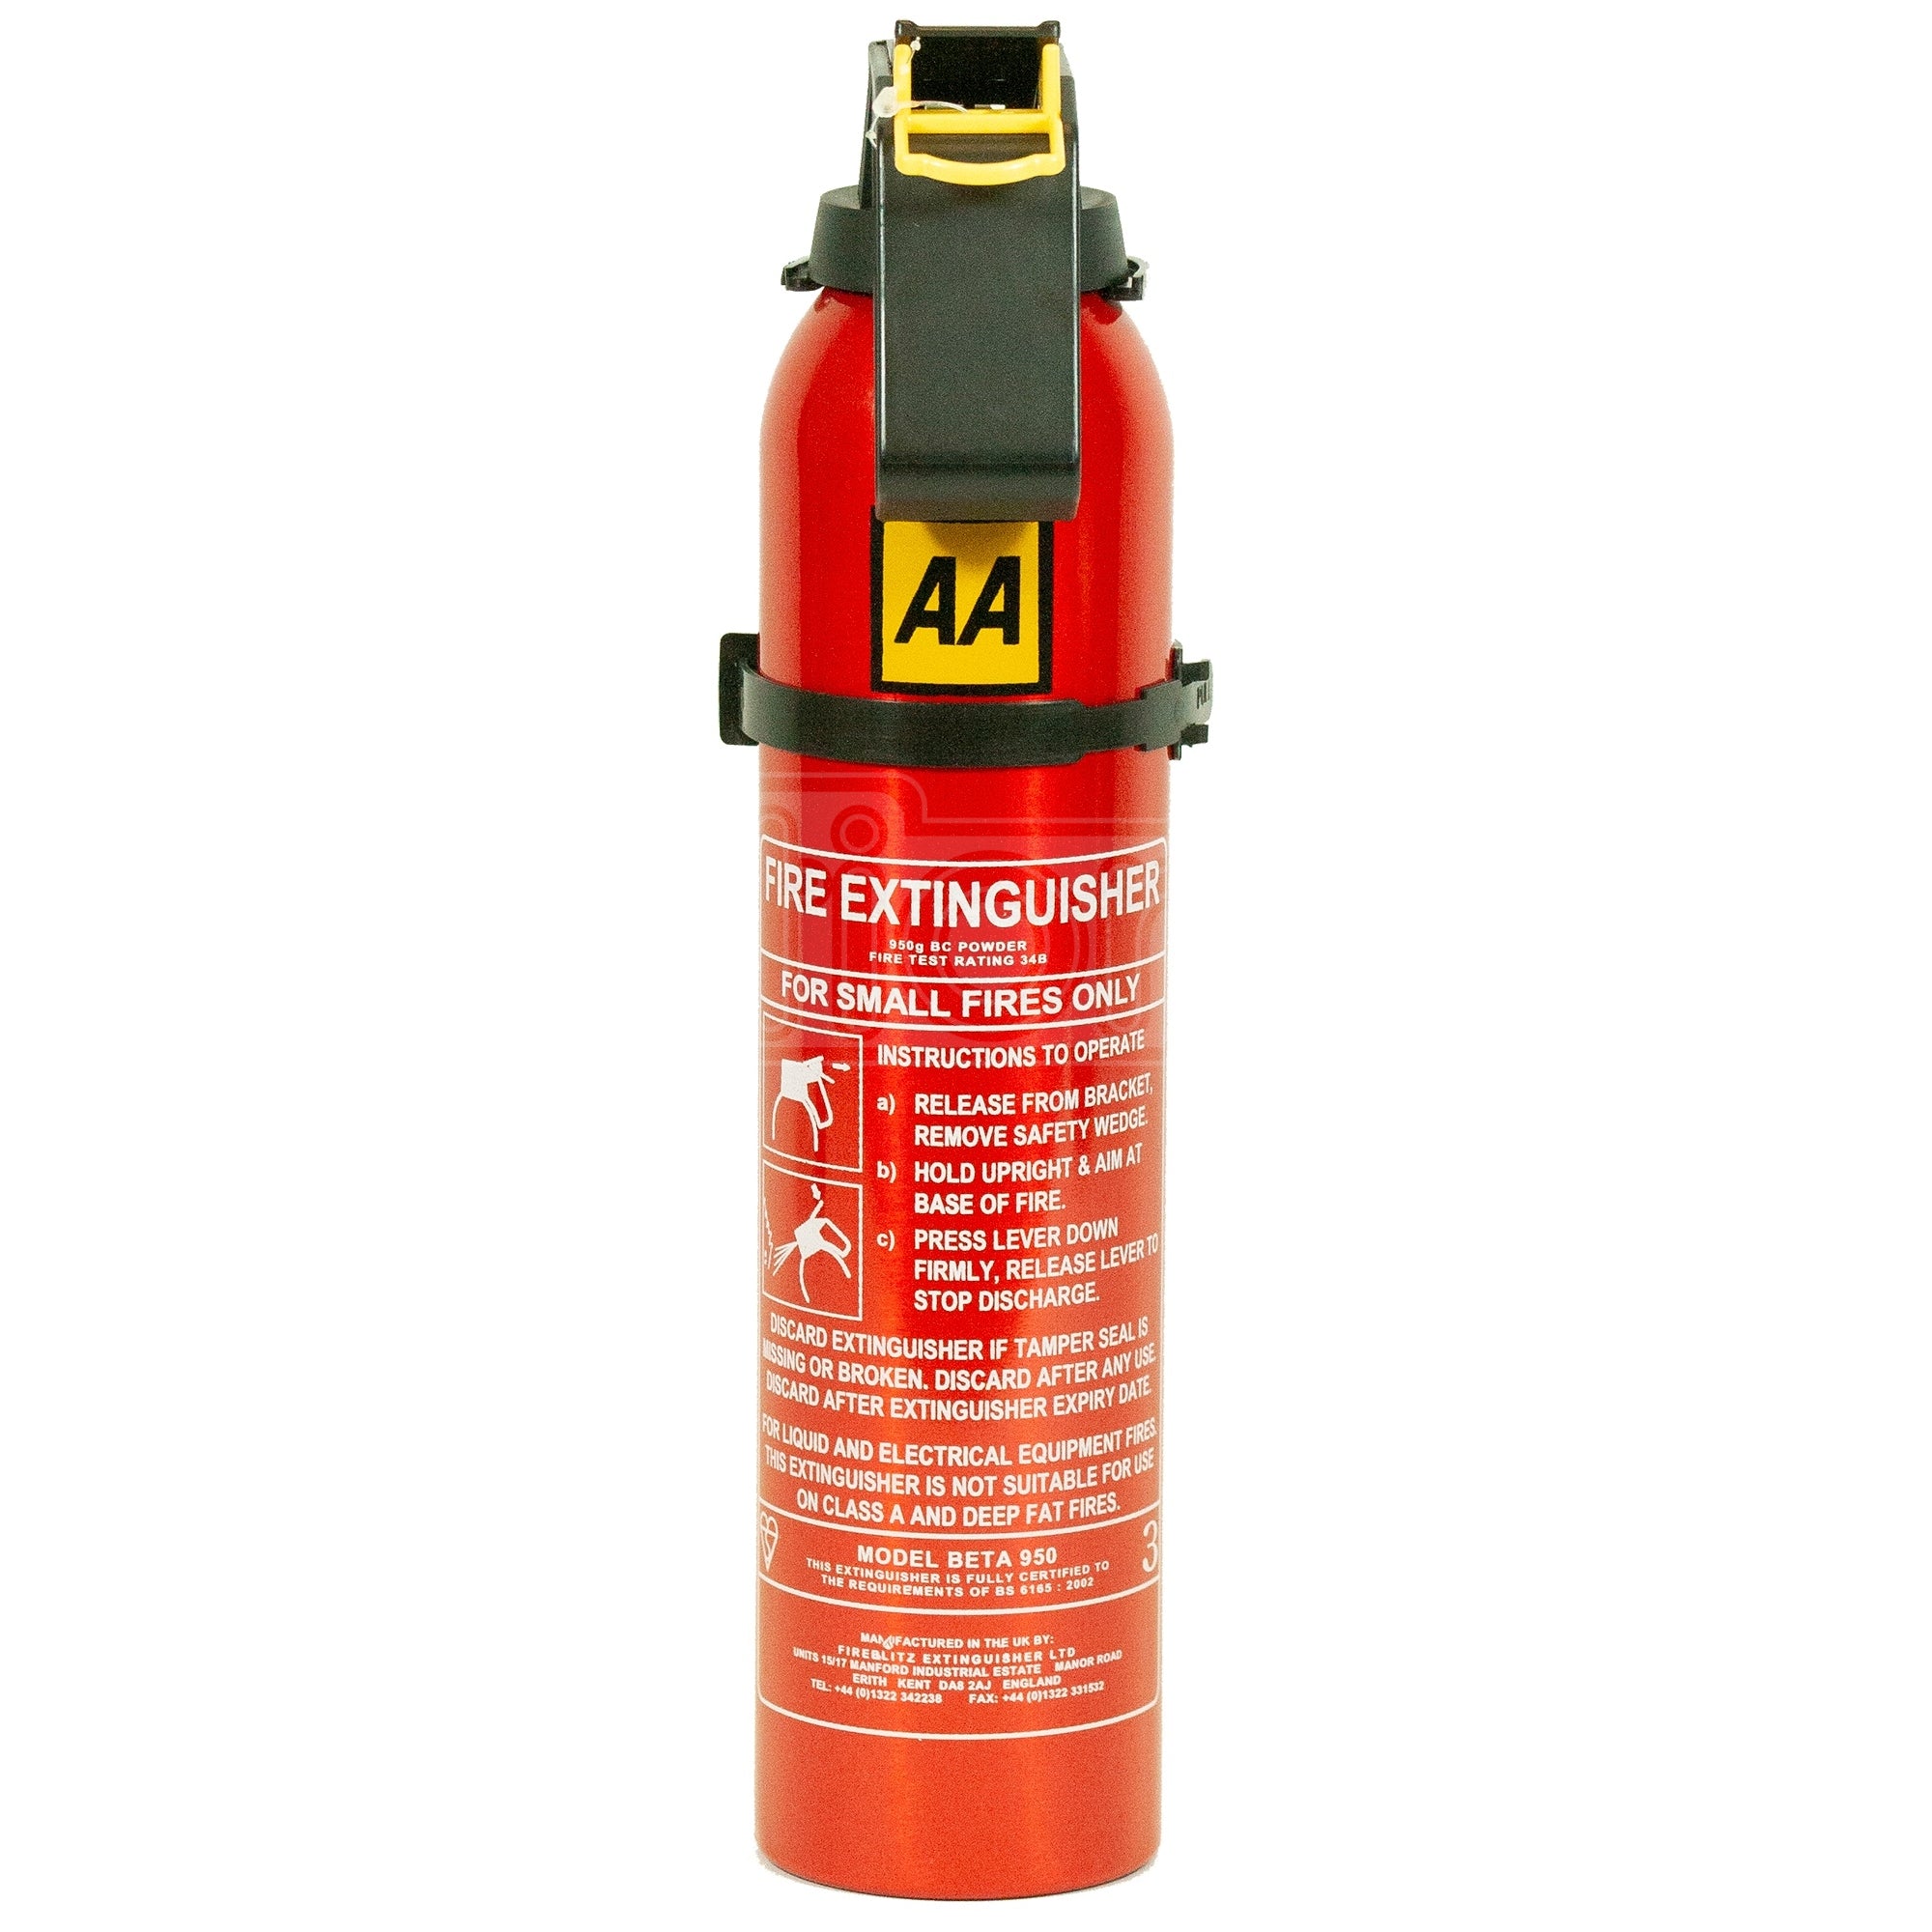 AA Fire Extinguisher 950G